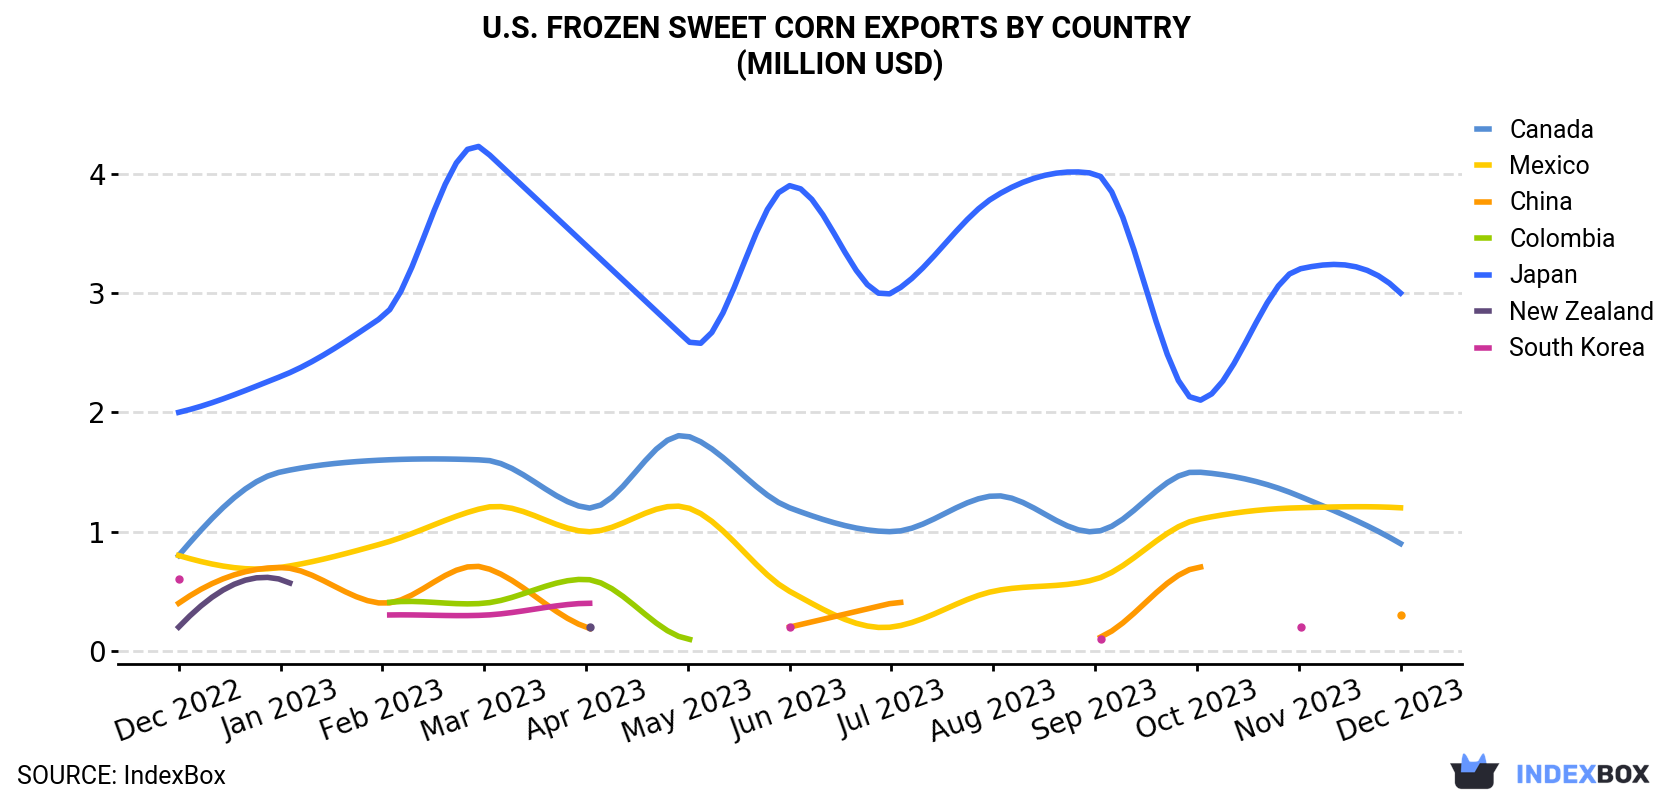 U.S. Frozen Sweet Corn Exports By Country (Million USD)